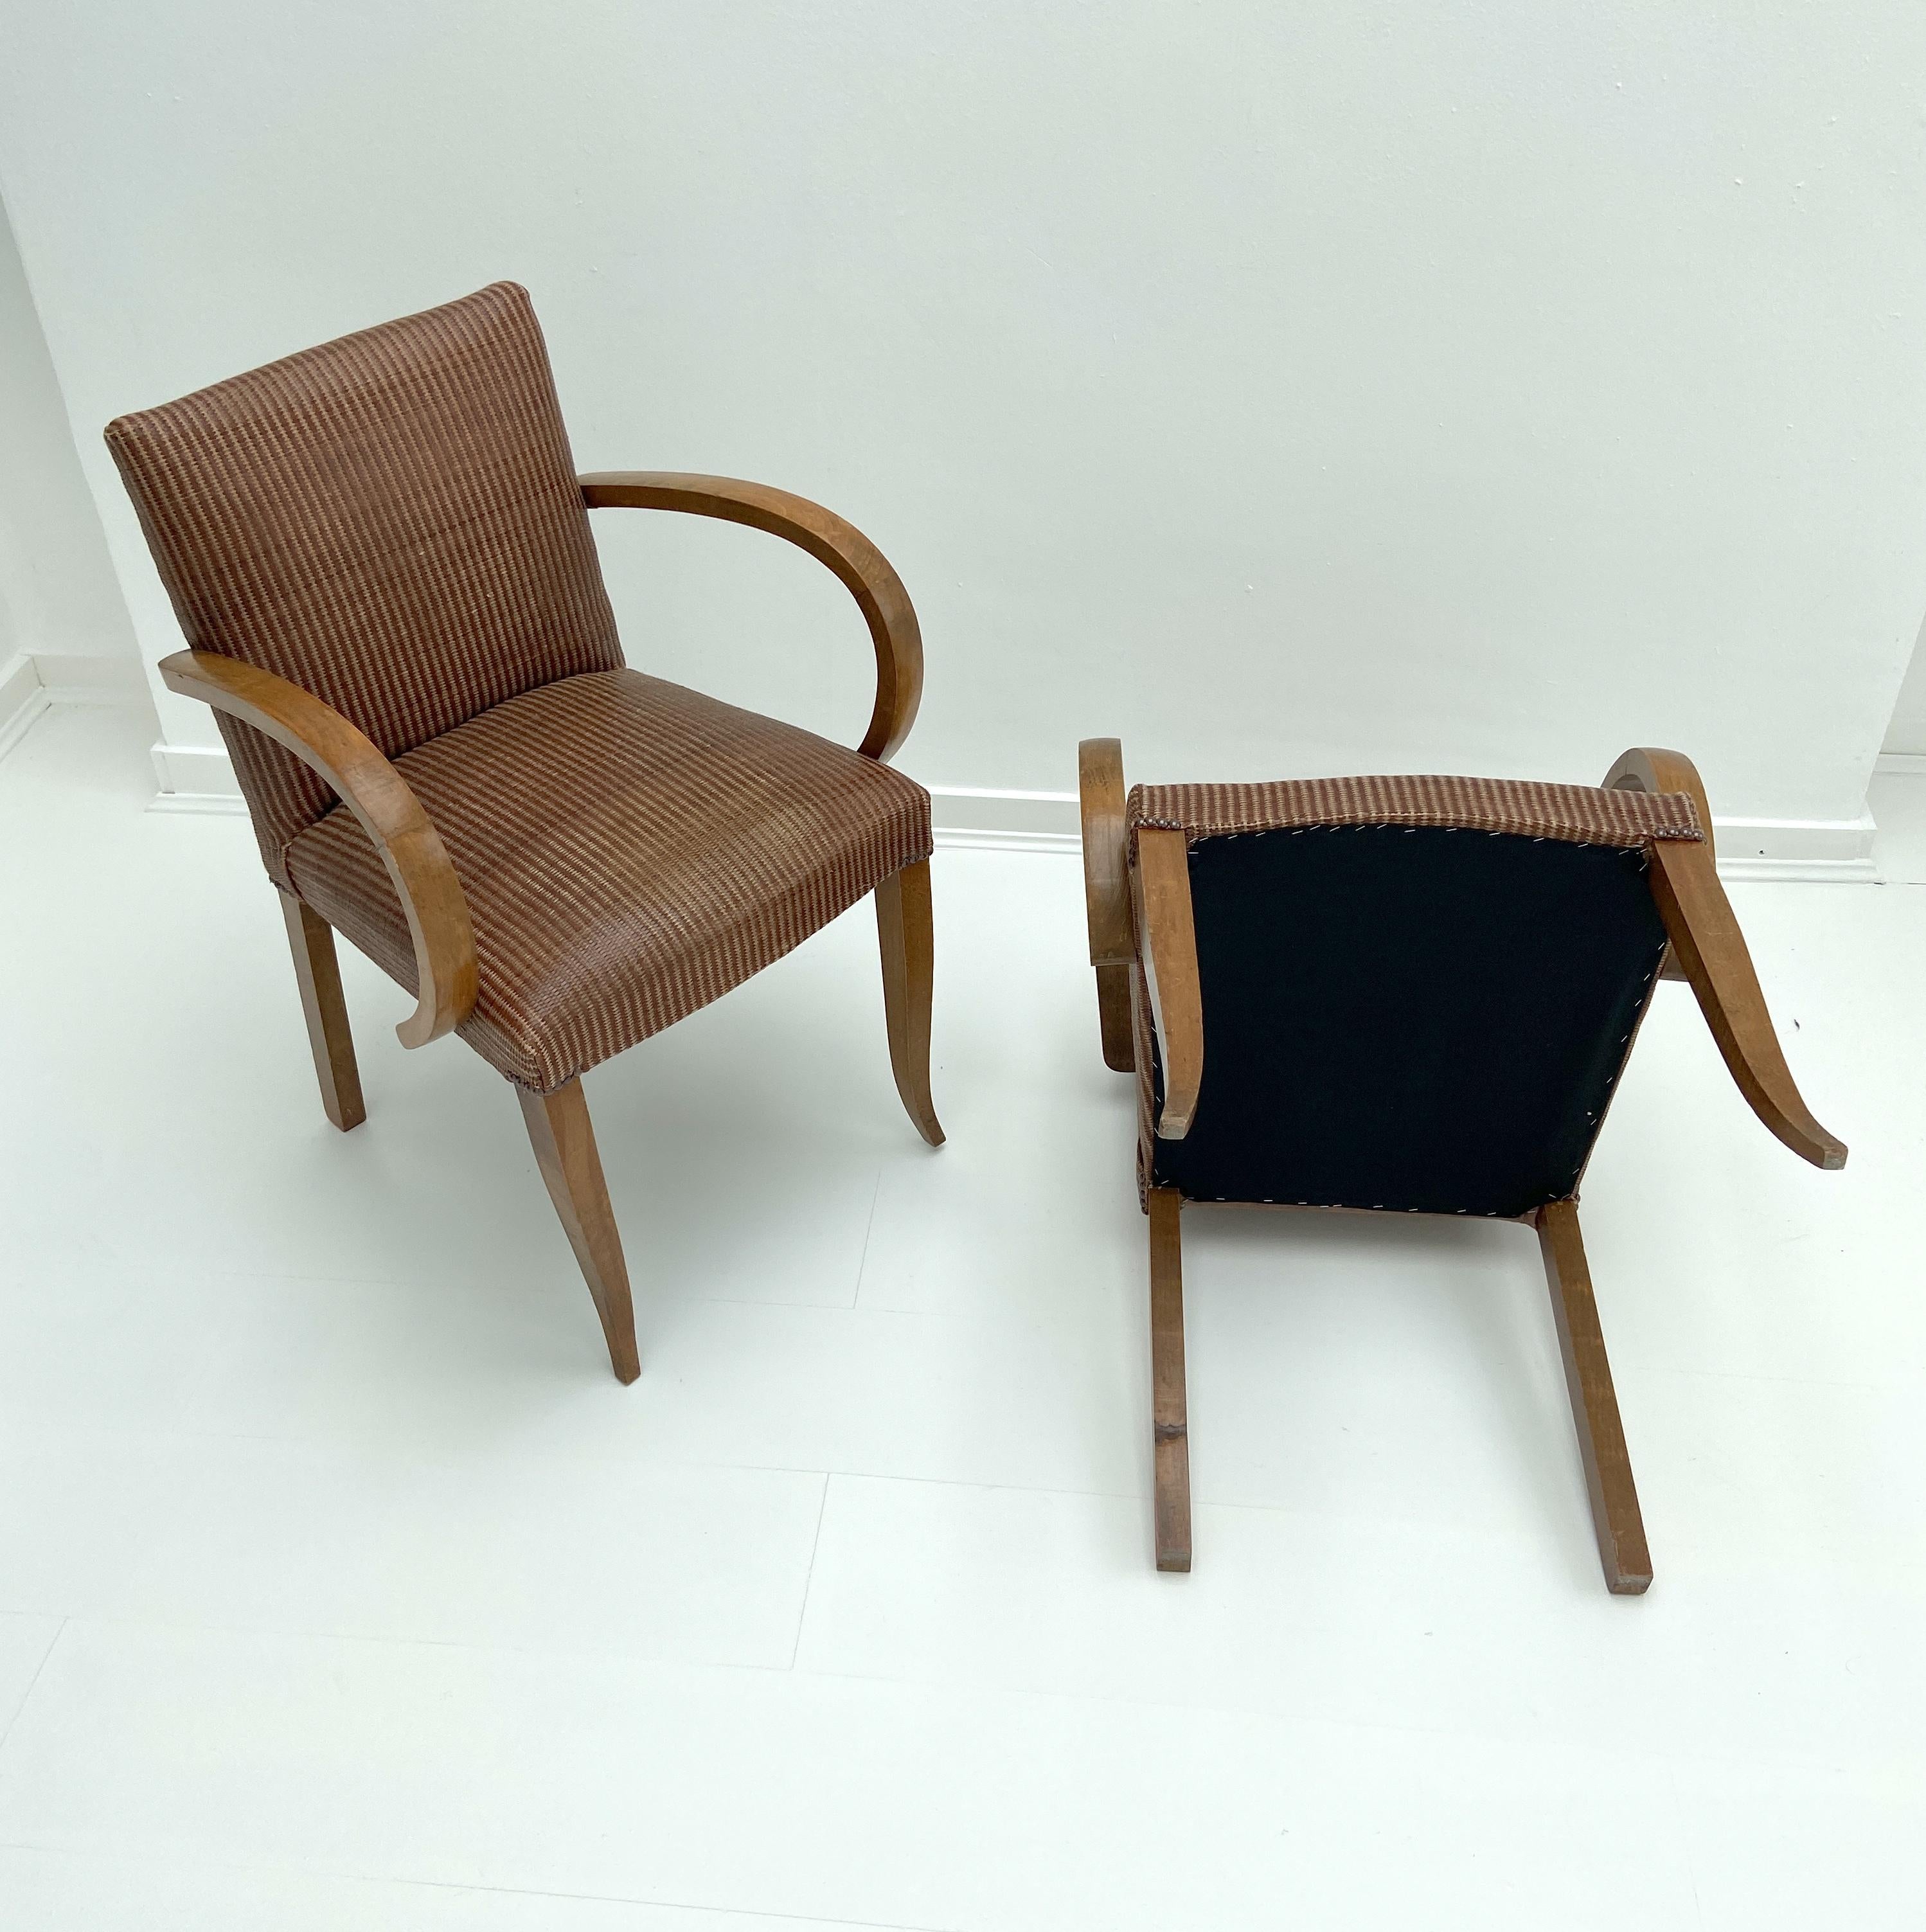 Pair of Modernist Bridge Chairs or Armchairs, French, 1930s For Sale 10